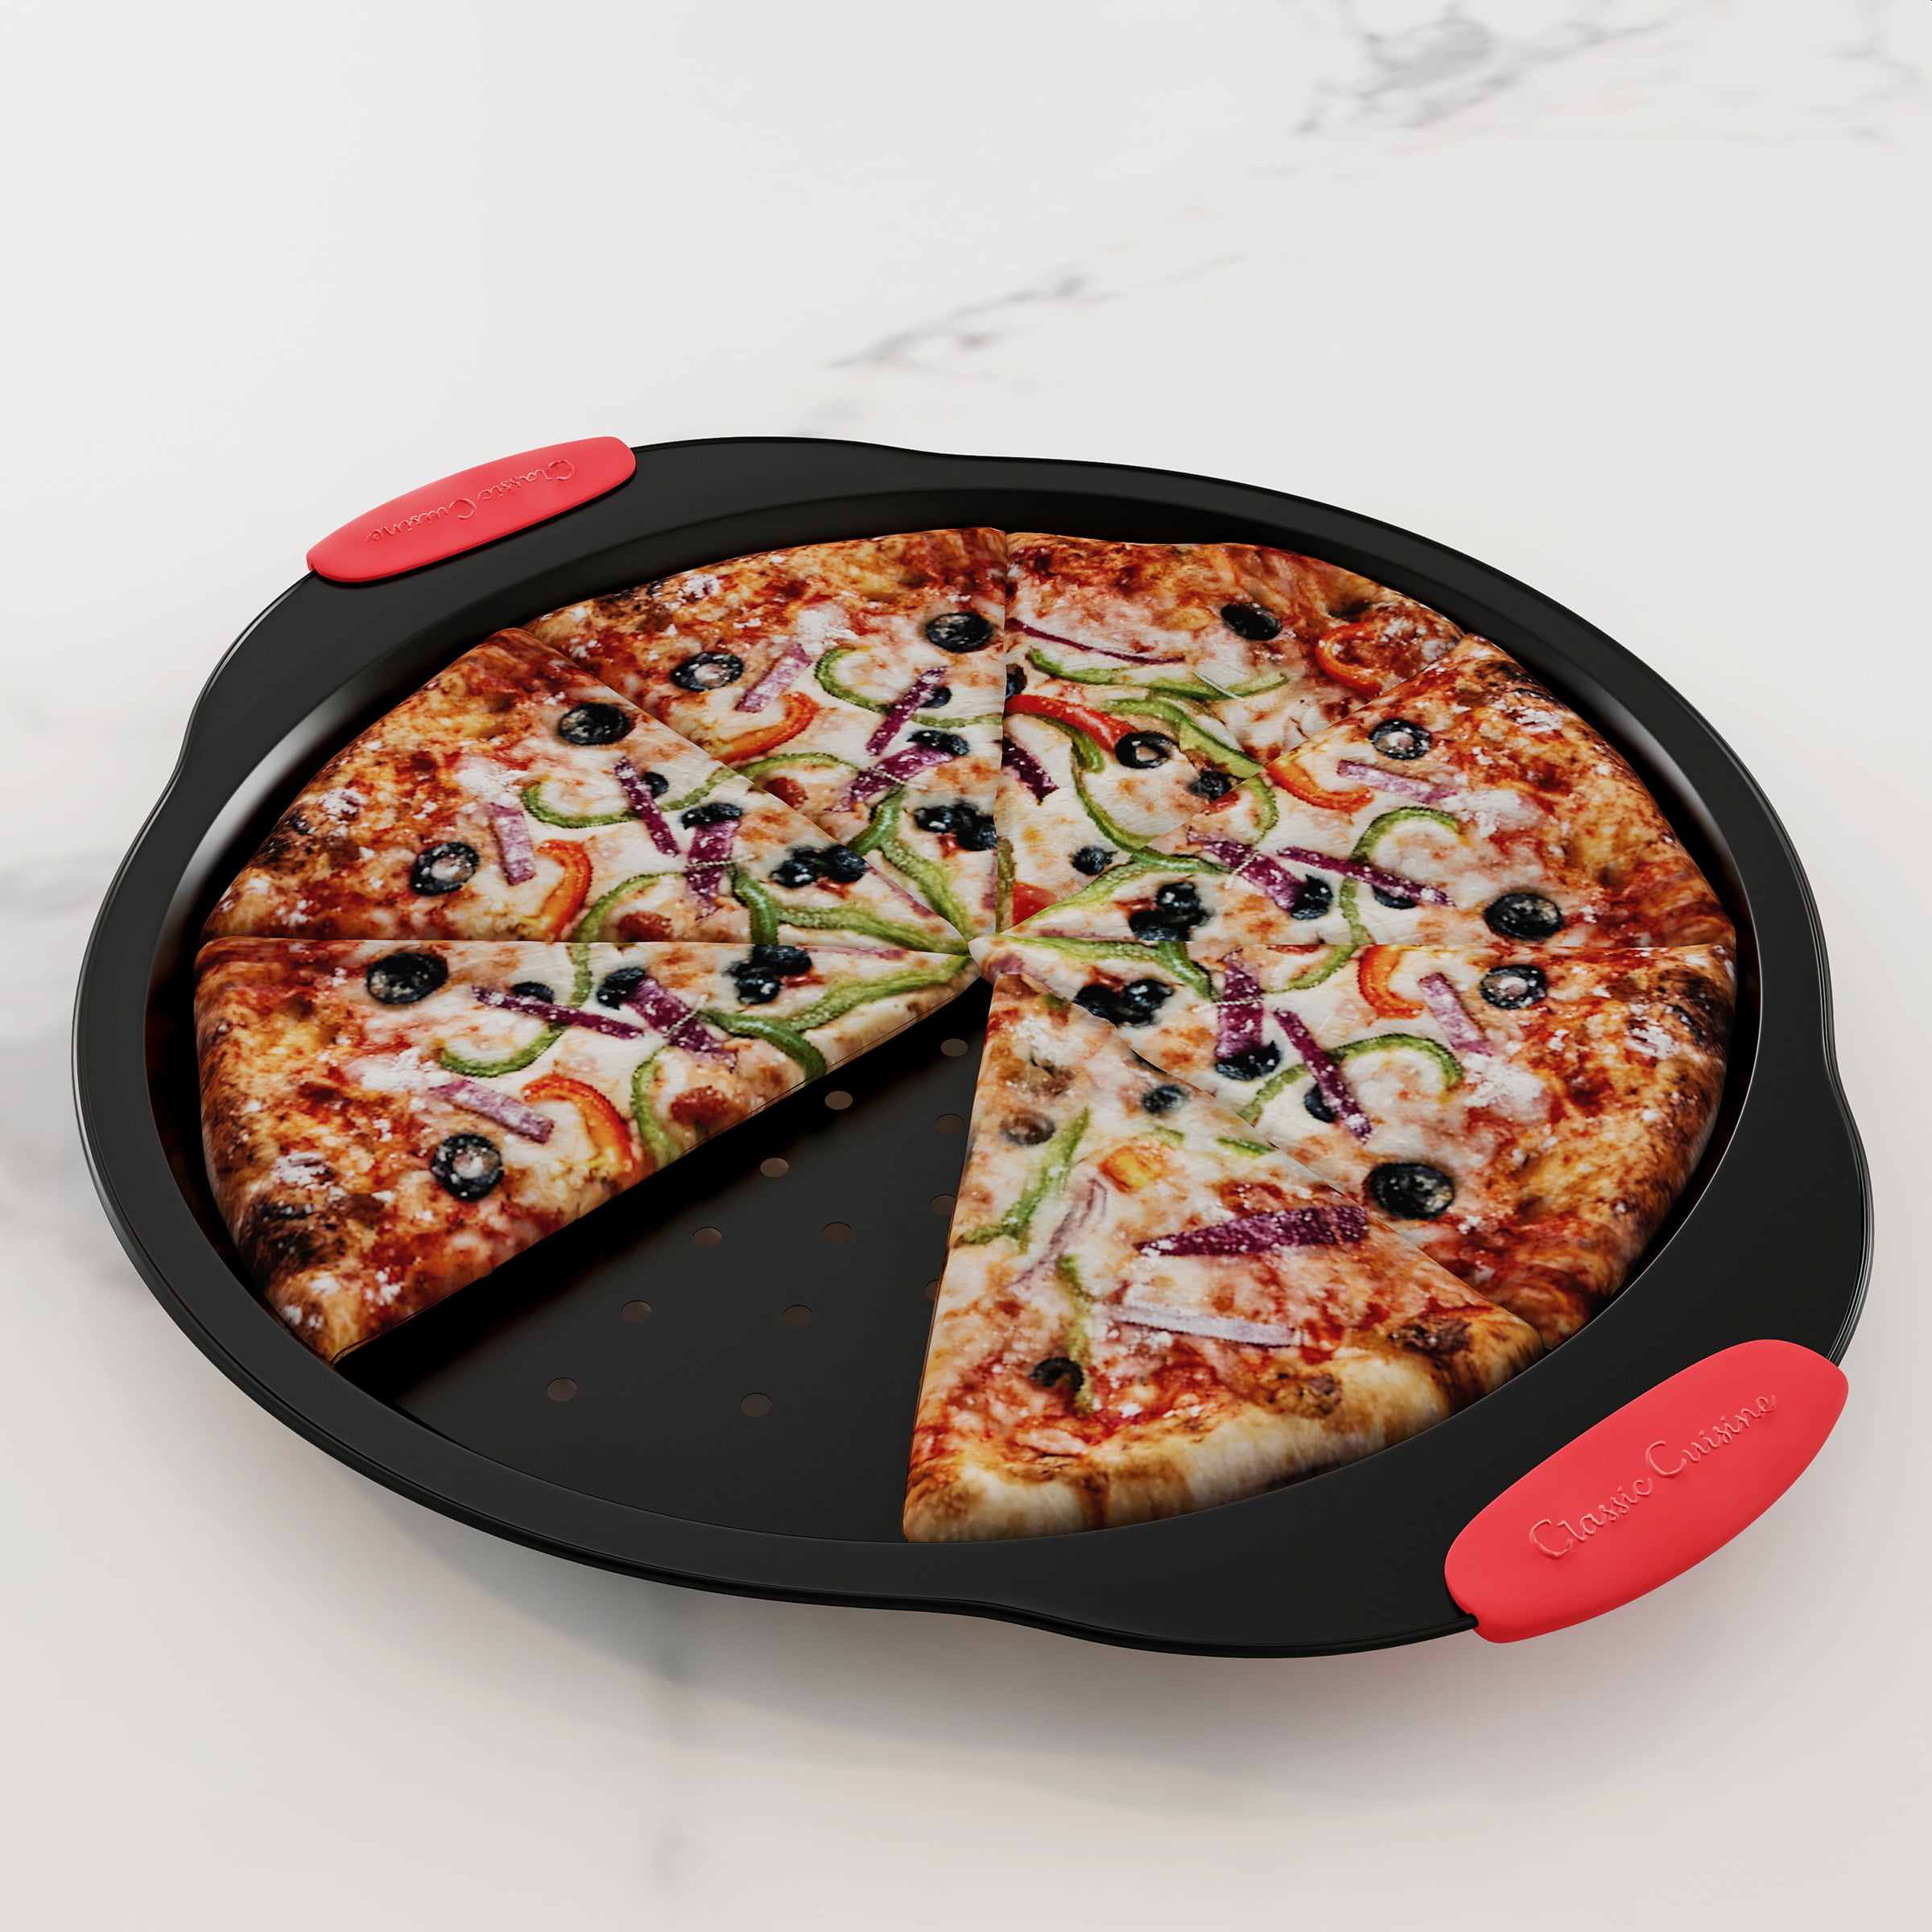 13" Pizza Crisping Pan with Cutter Non-Stick Coating Easy Clean Kitchen Cookware 